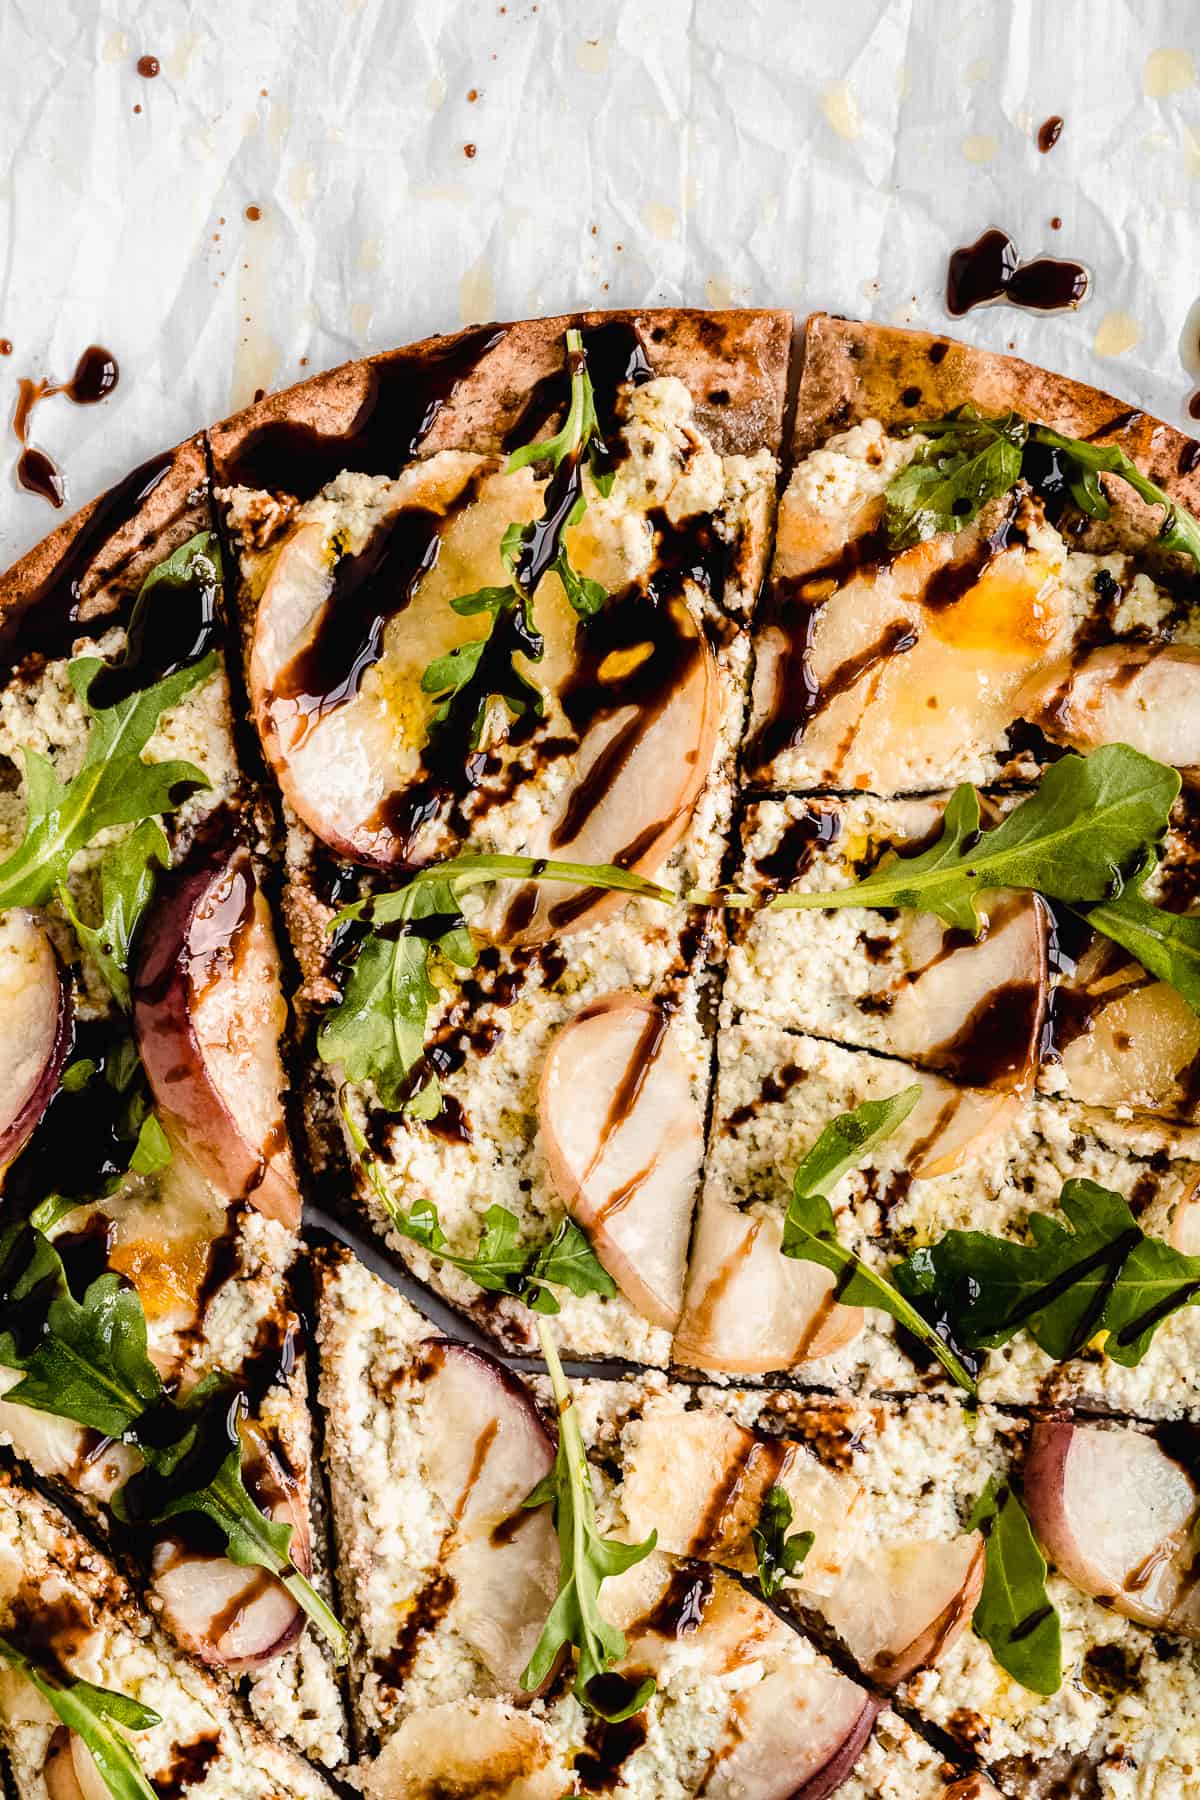 Closeup photo of the toppings on the Crispy White Peach and Ricotta Pesto Flatbread with Balsamic Glaze.  